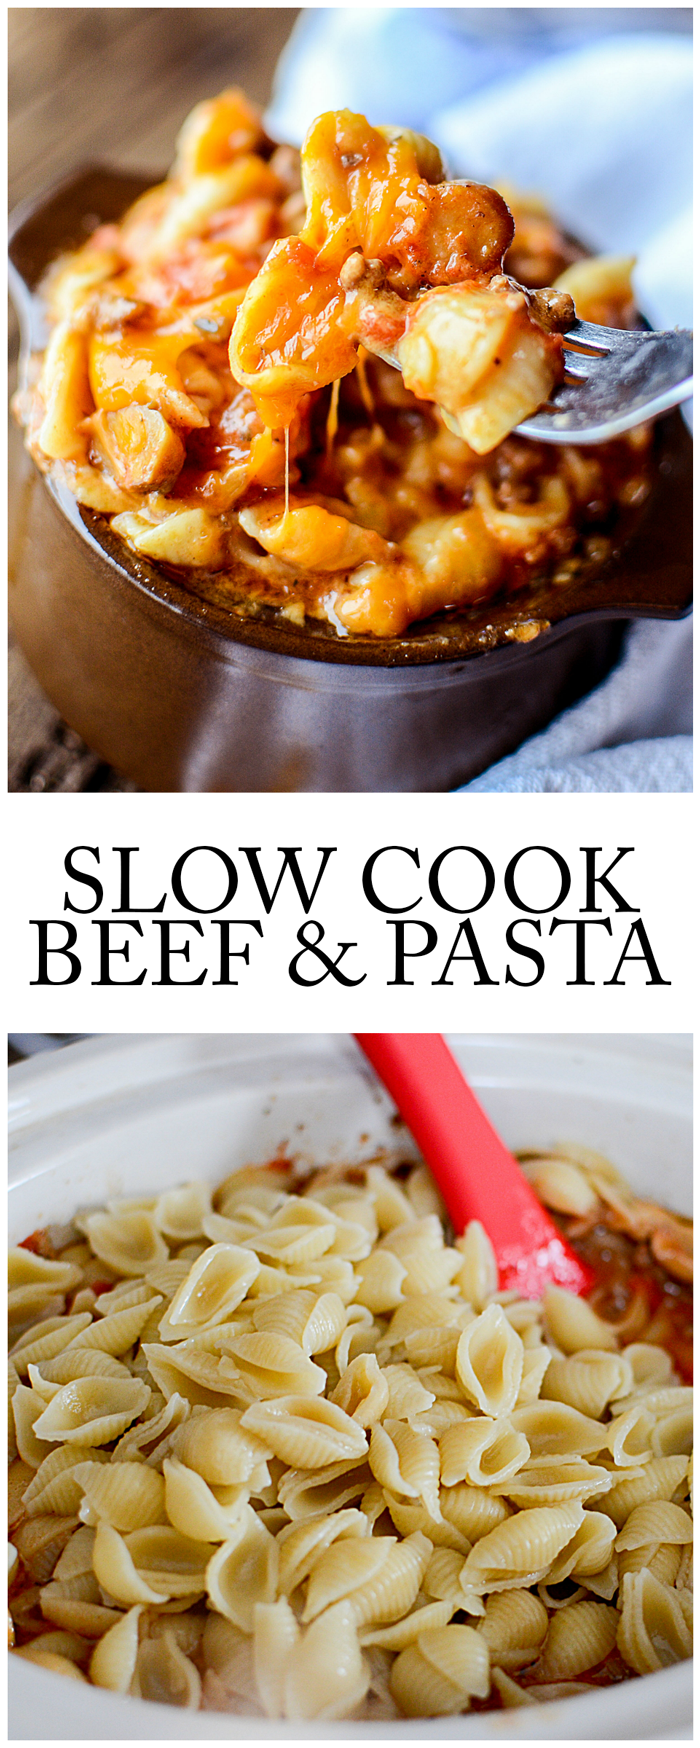 Slow Cook Beef and Pasta using the Crock pot made with cheddar cheese from Food Blogger - April Golightly